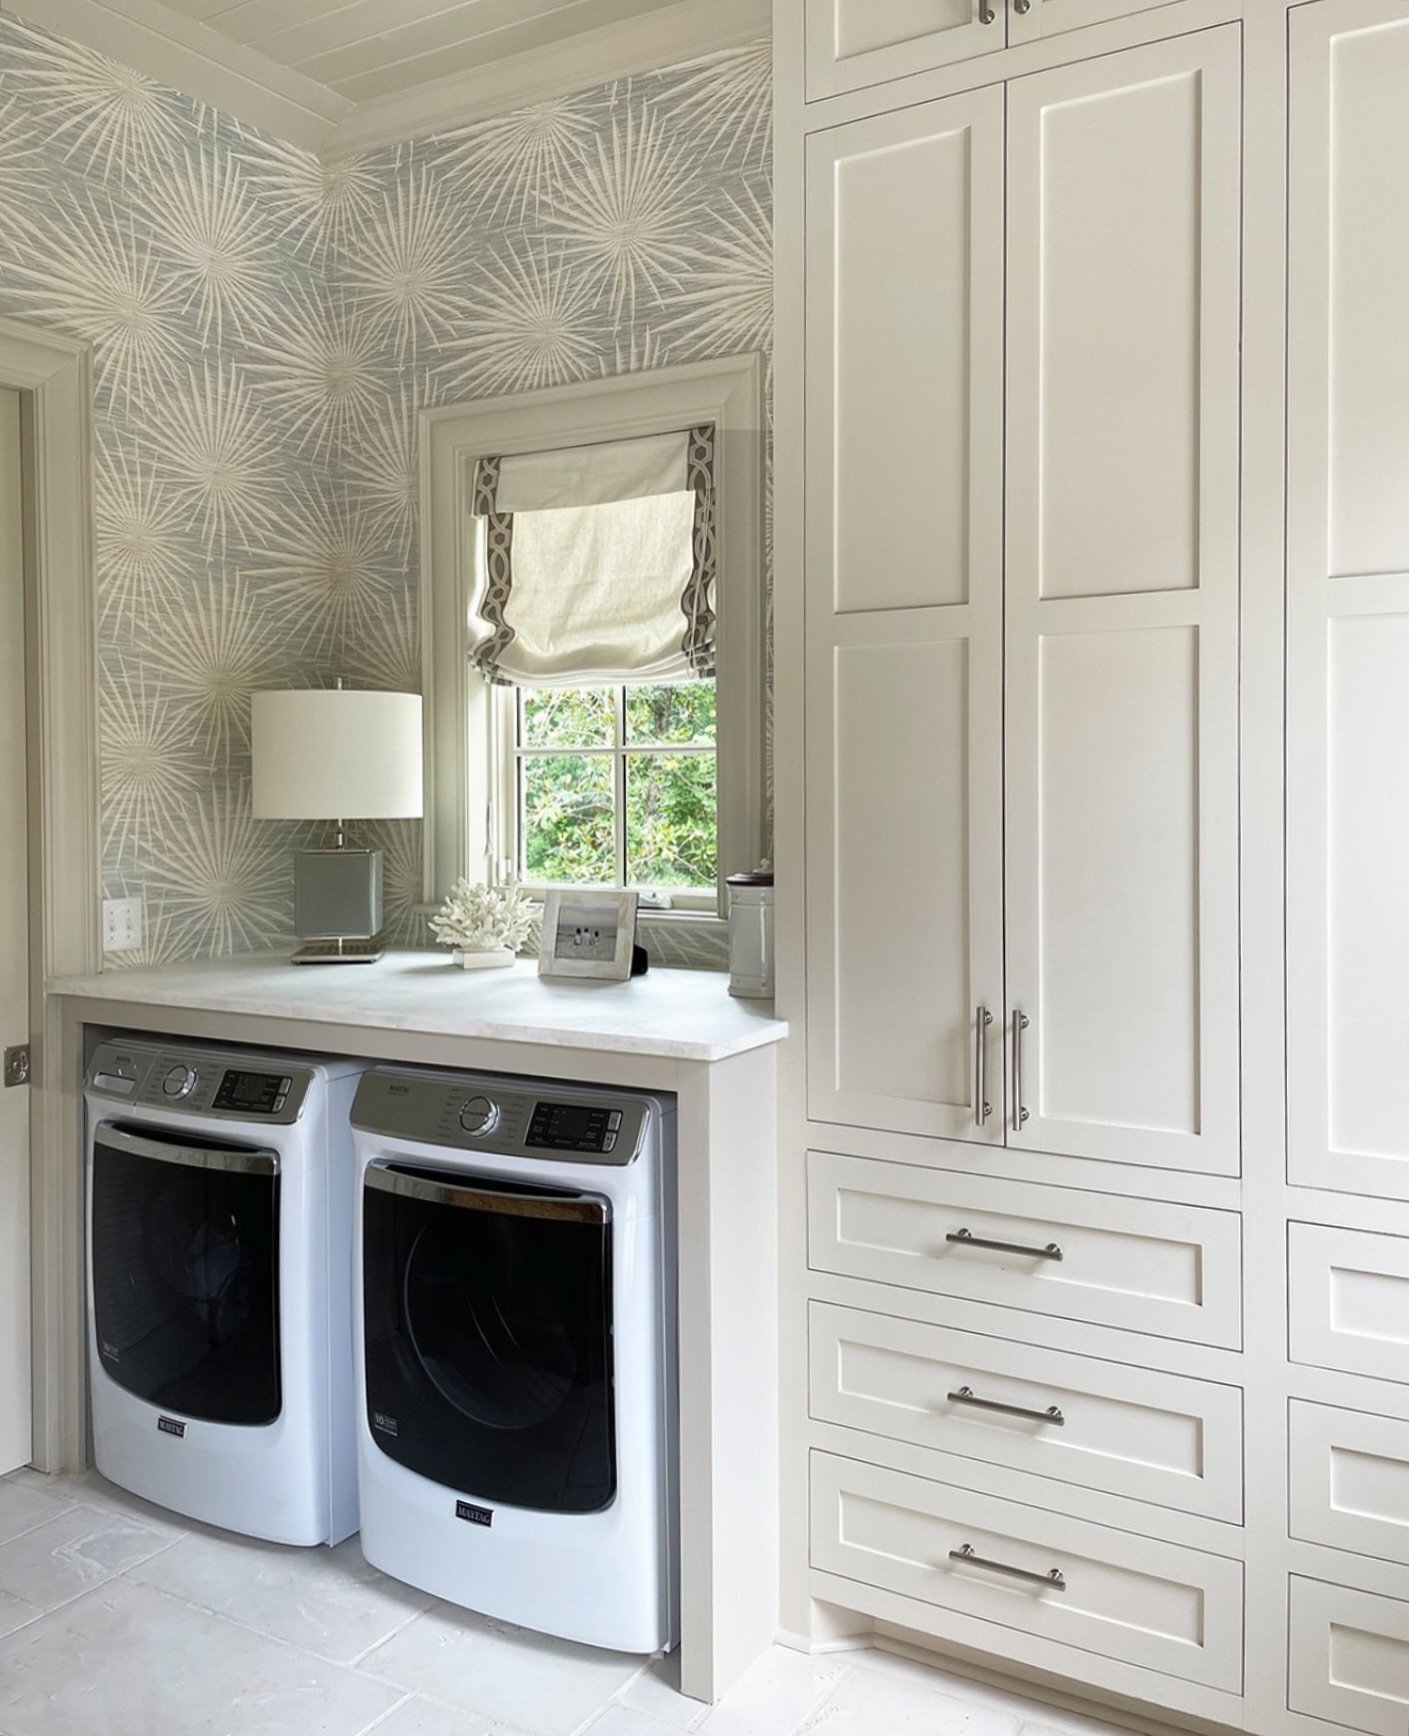 Laundry rooms should be high-style, too, right? 

We love this beautiful and functional space designed by @hathaway_atelier!